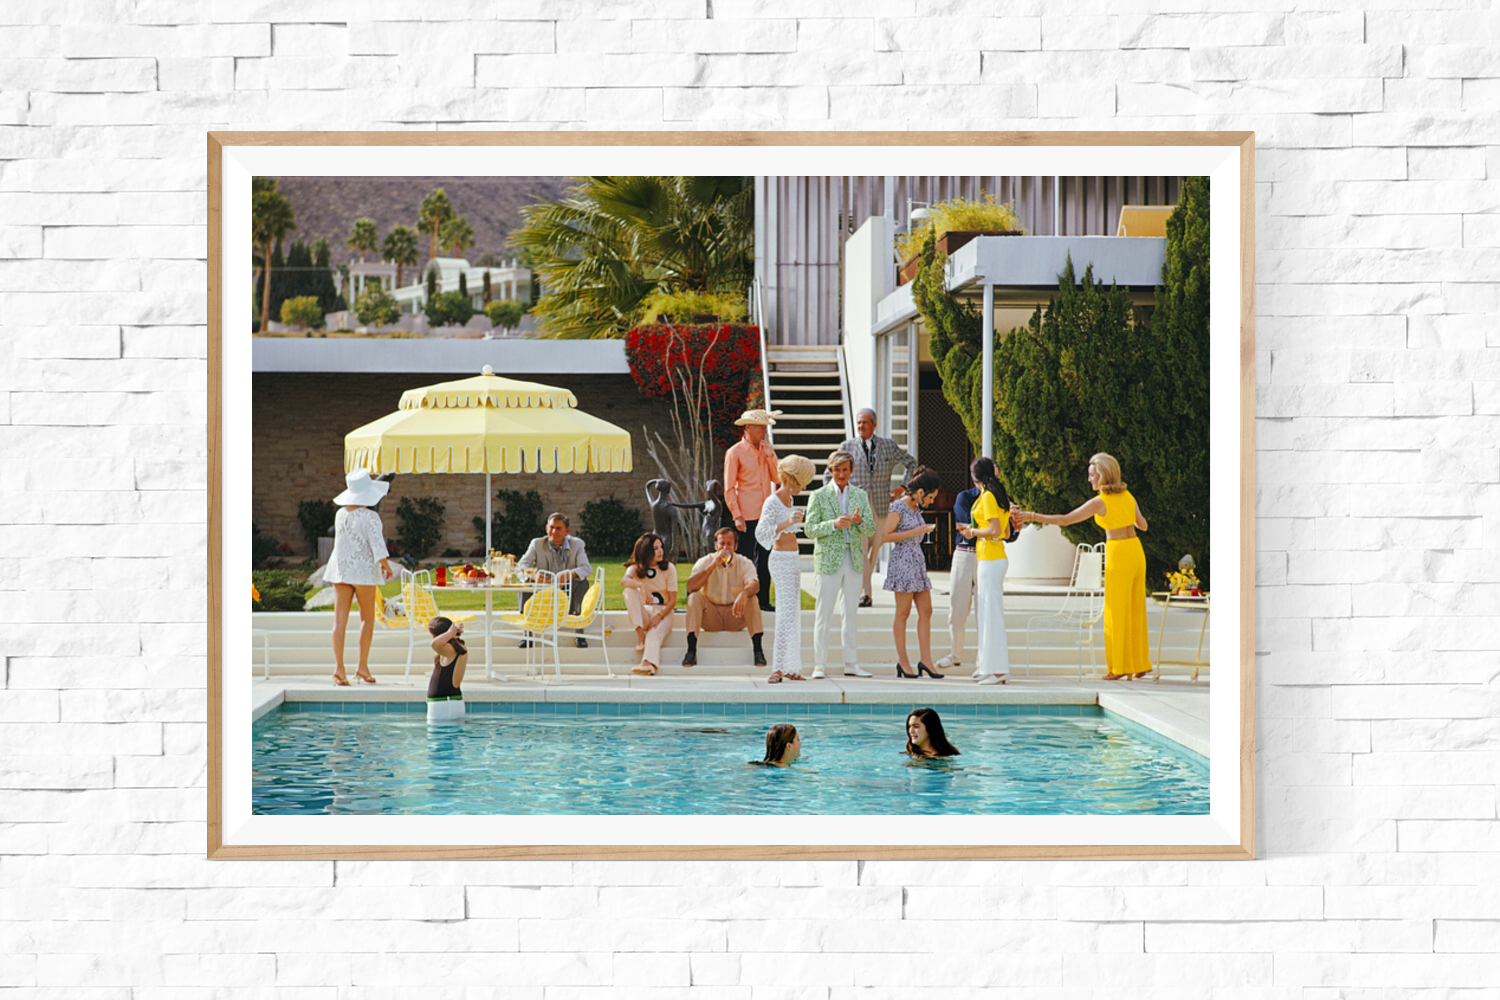 Framed Slim Aarons: Poolside Gathering Palm Springss photo for sale Getty Images Gallery